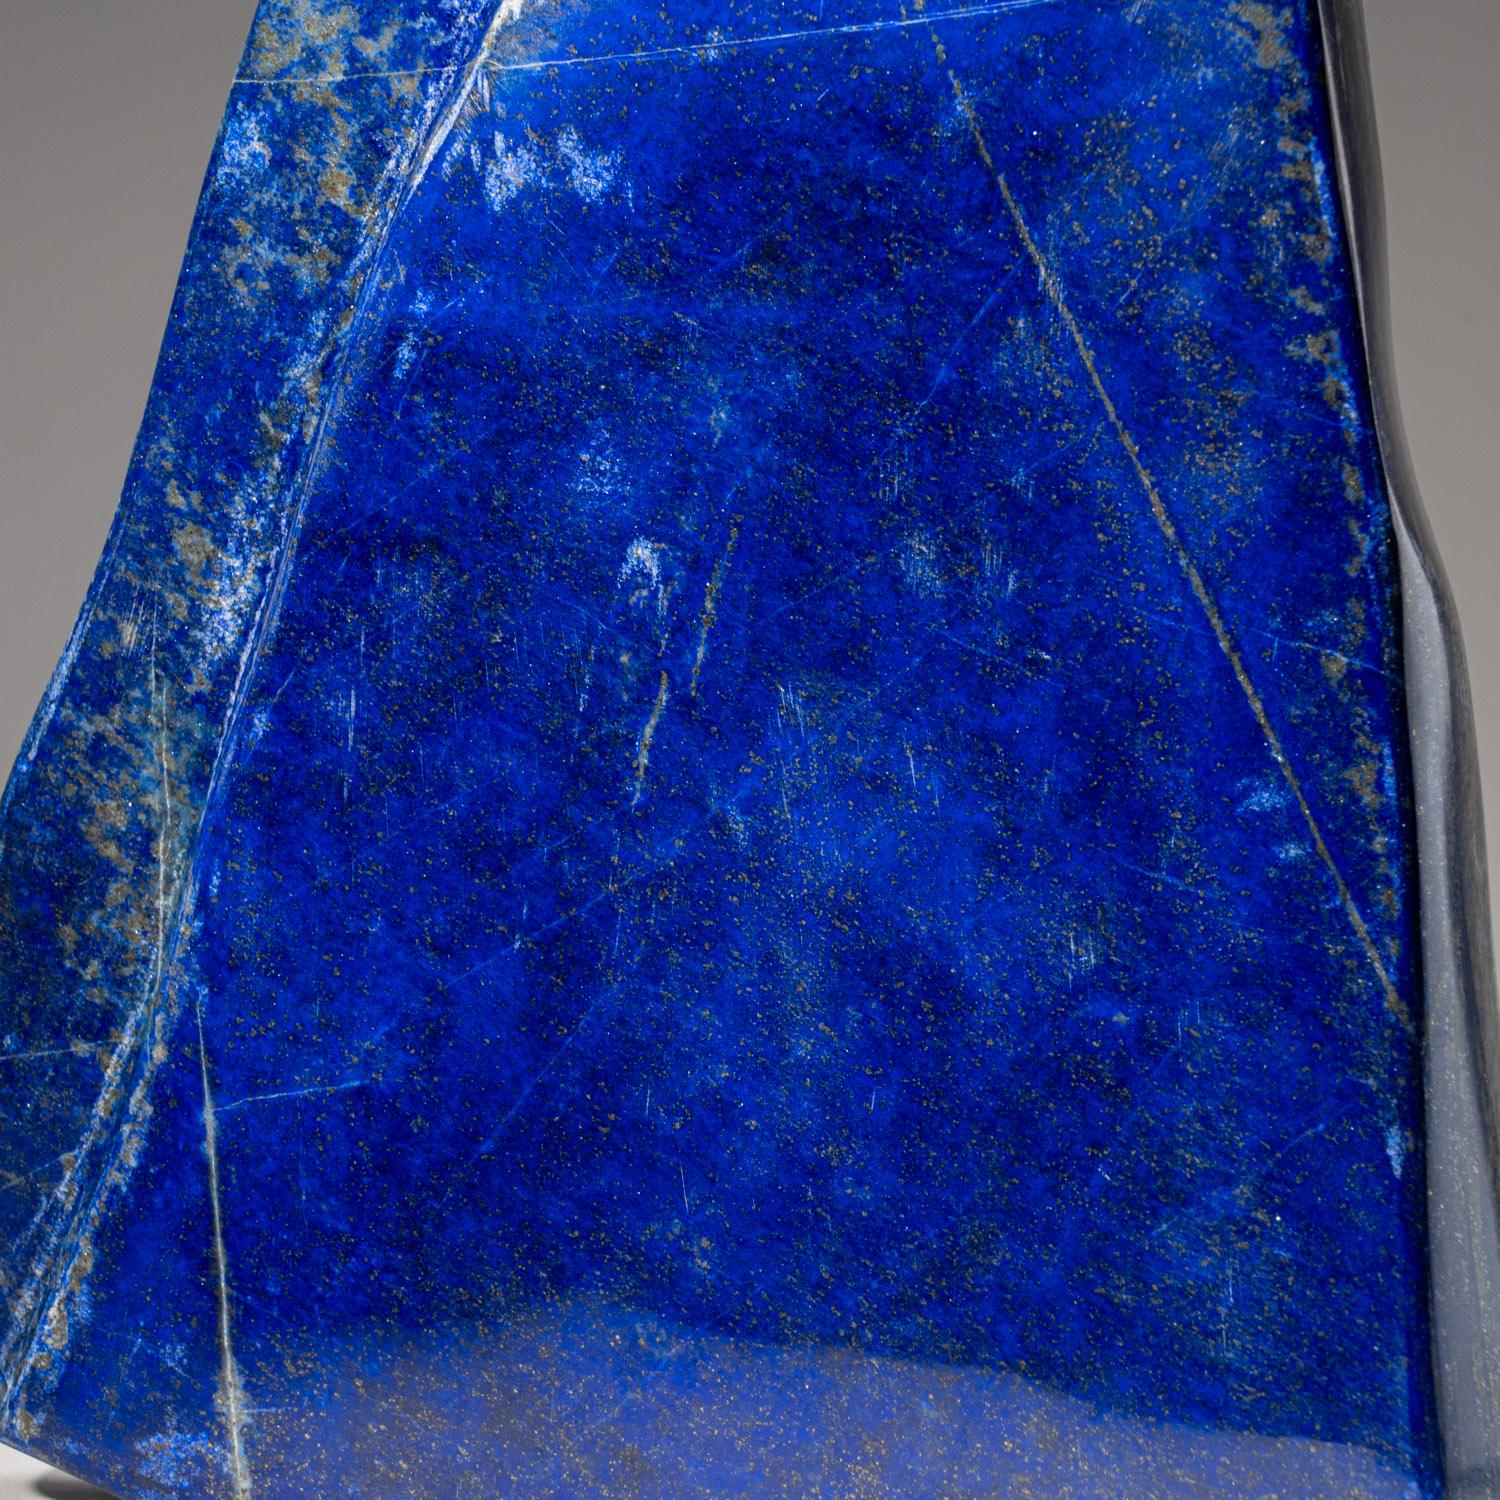 Contemporary Polished Lapis Lazuli Freeform from Afghanistan (9.5 lbs)